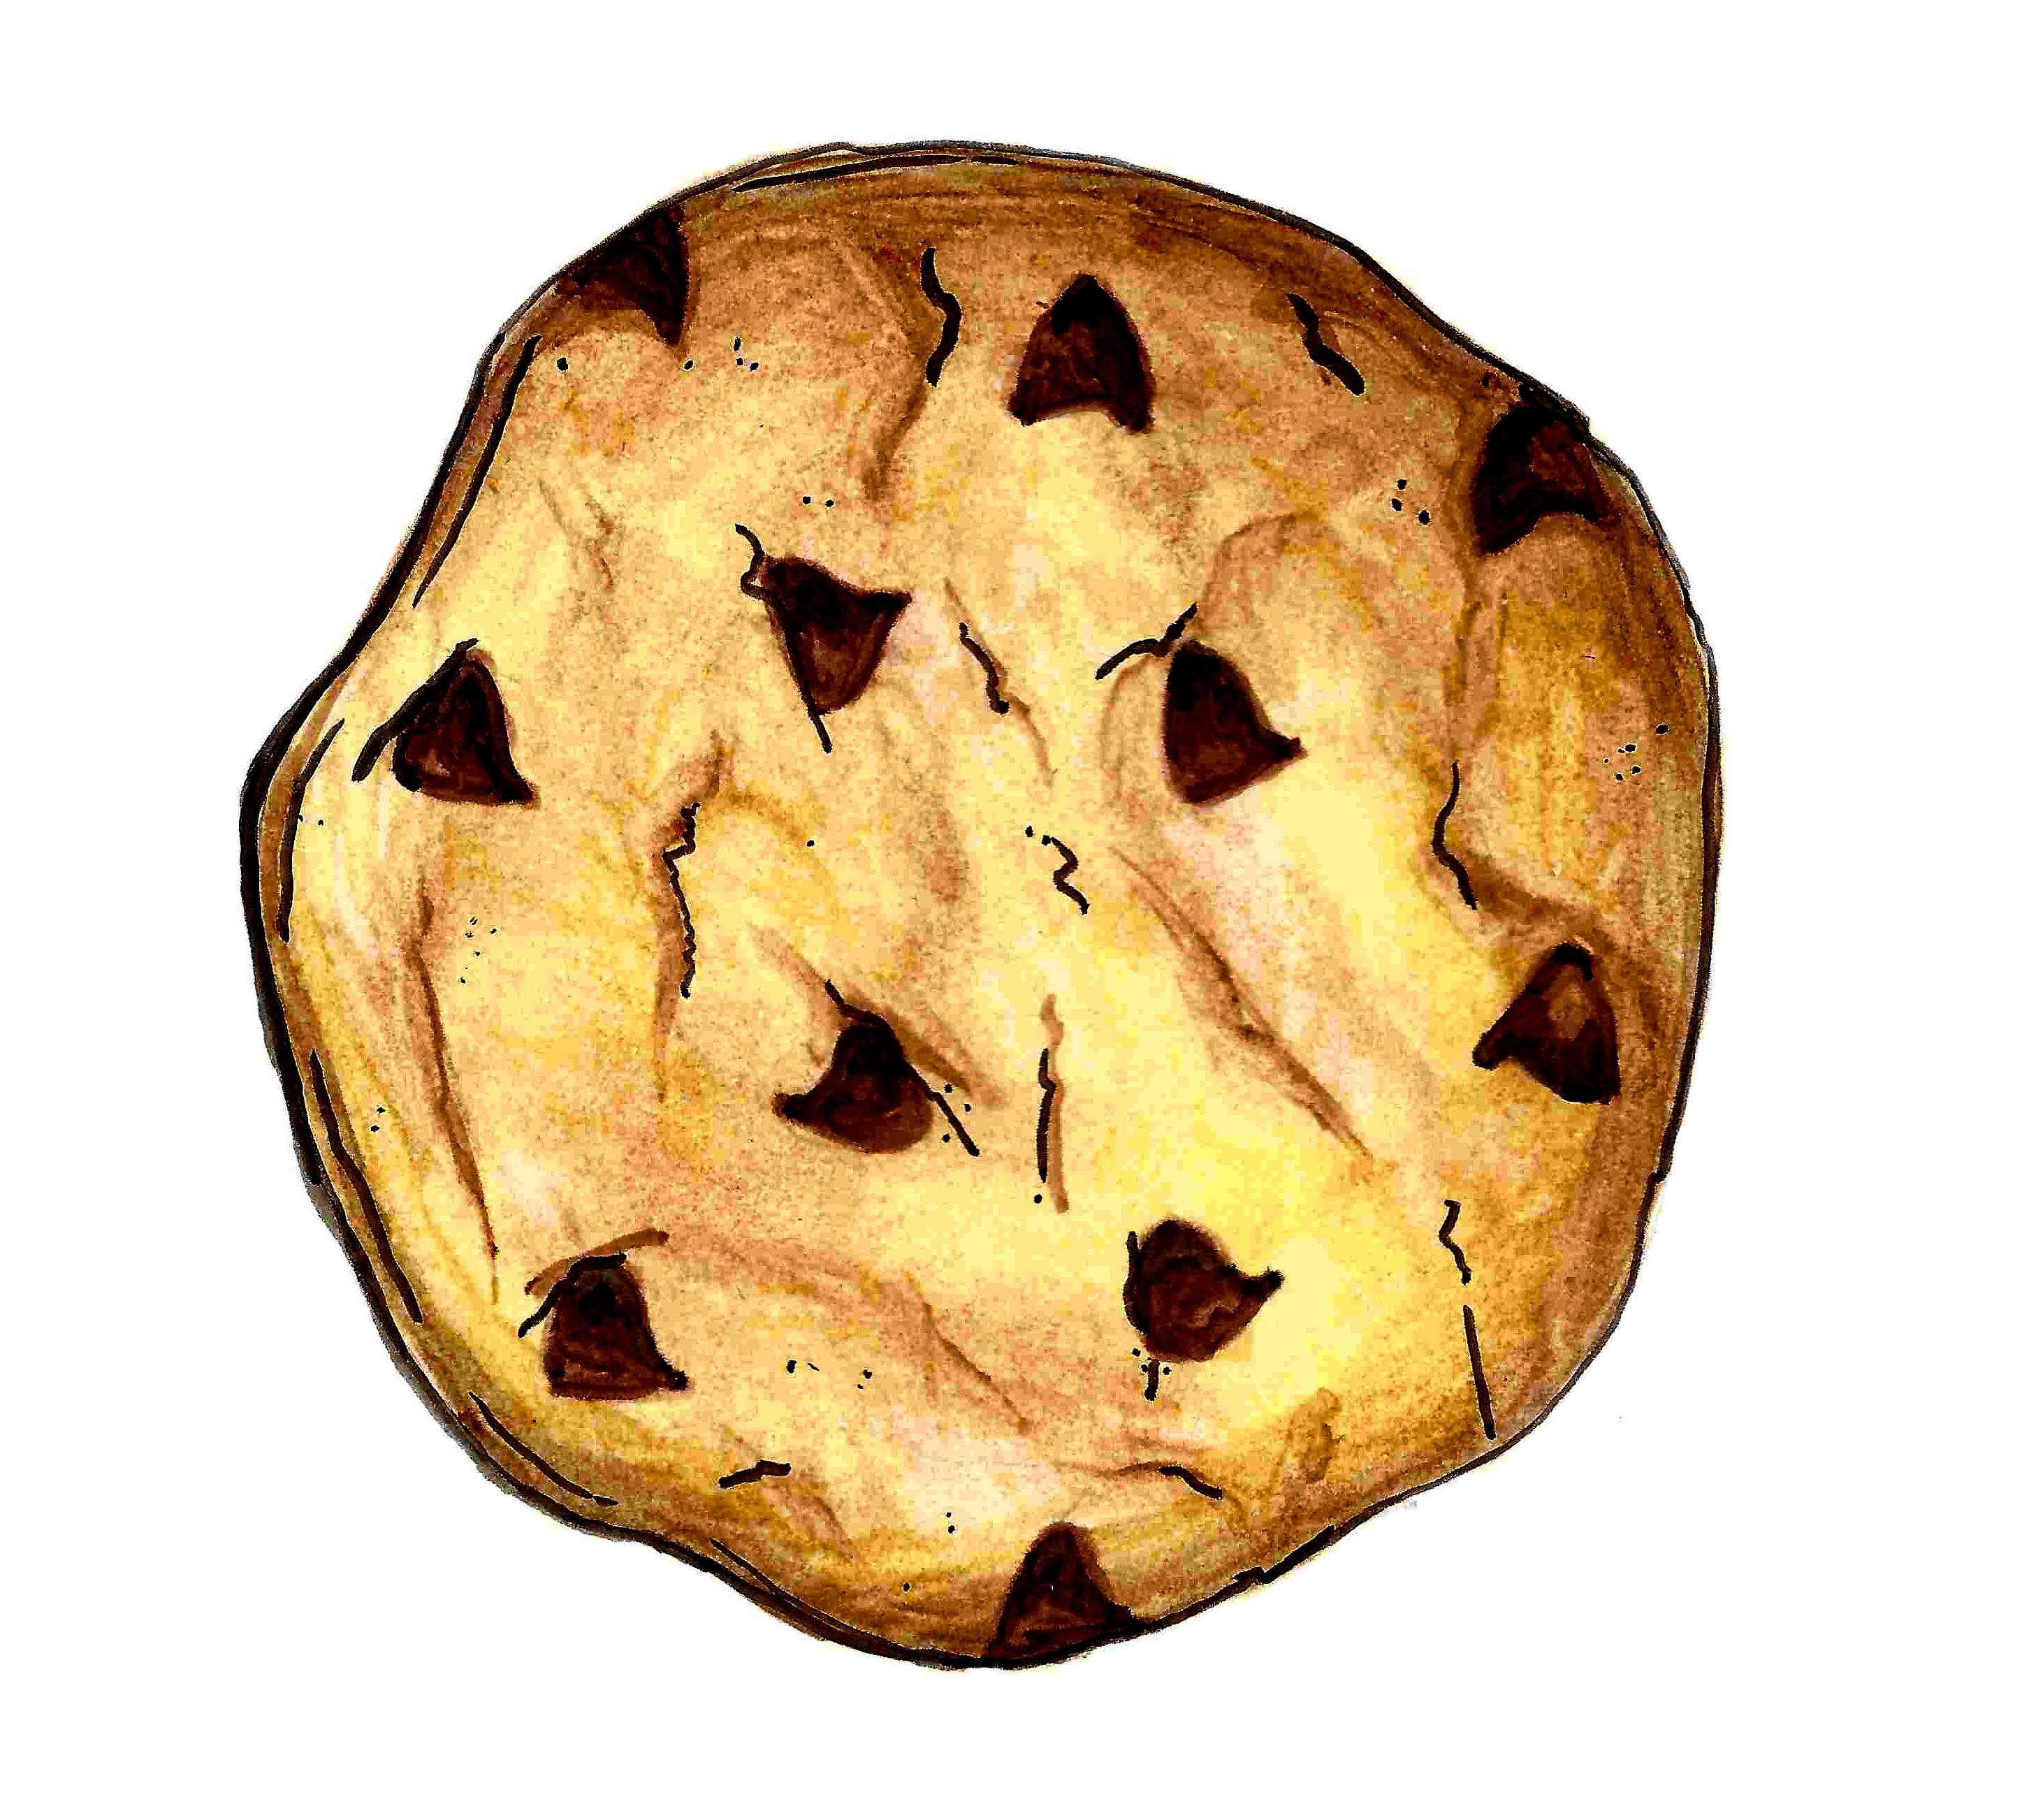 Chocolate Chip Cookie Transparent Background 76871